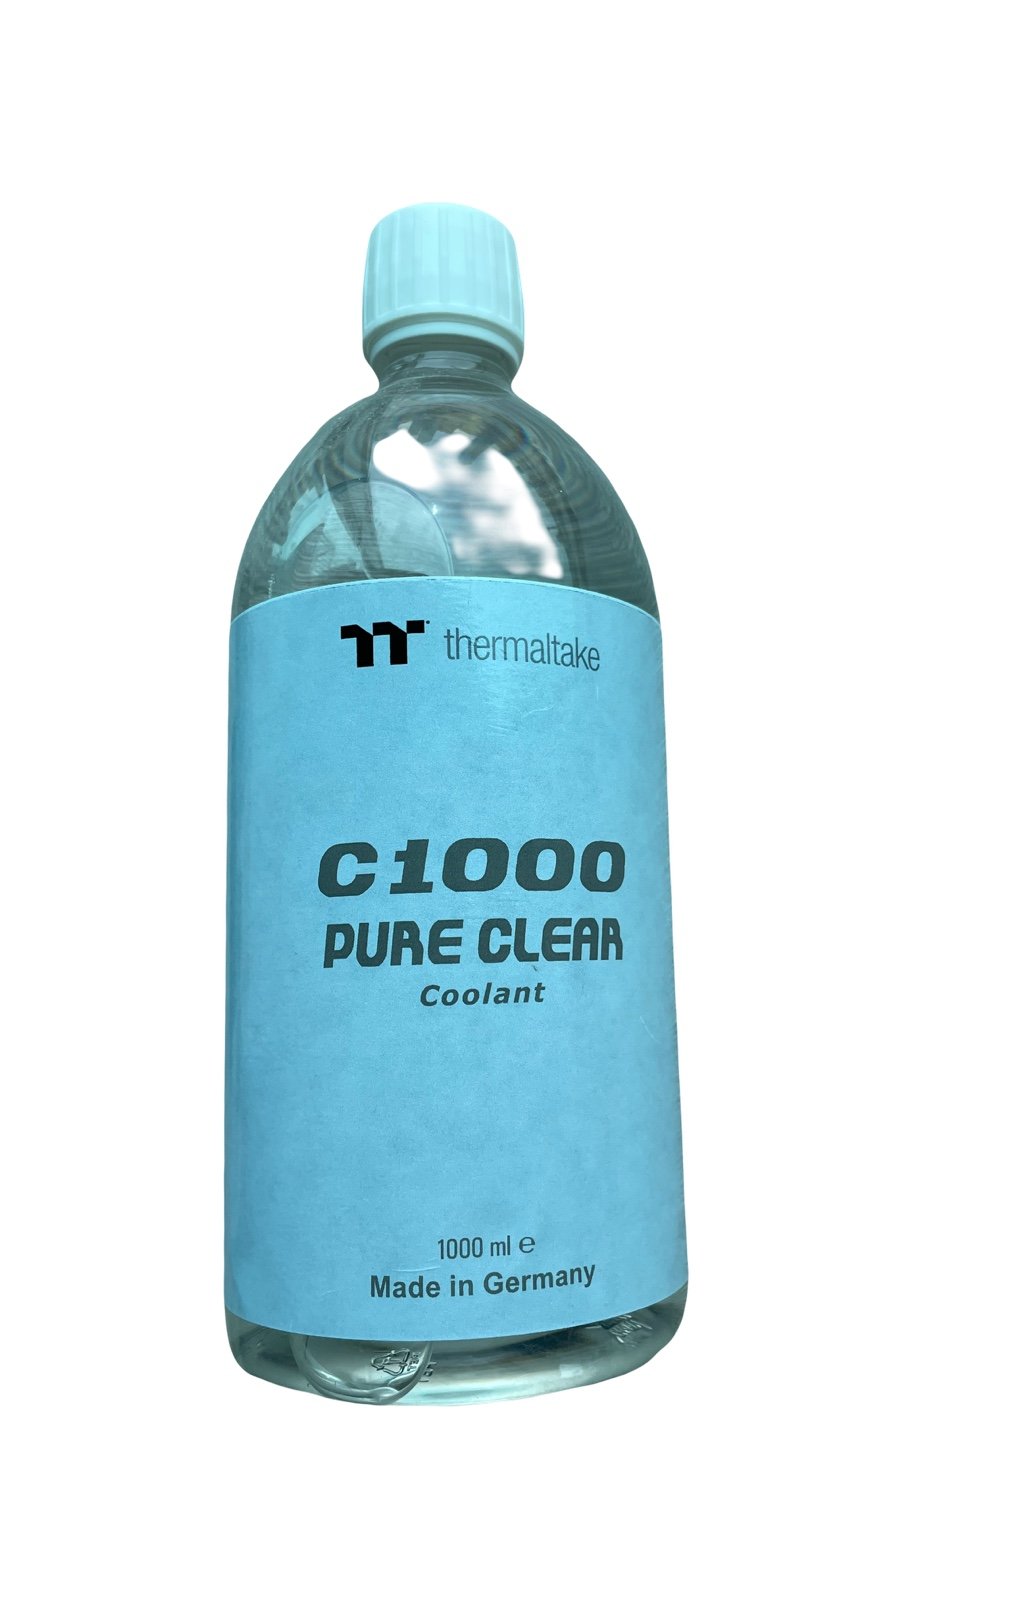 New thermaltake c1000 Pure Clear Coolant bUNLf0mwG